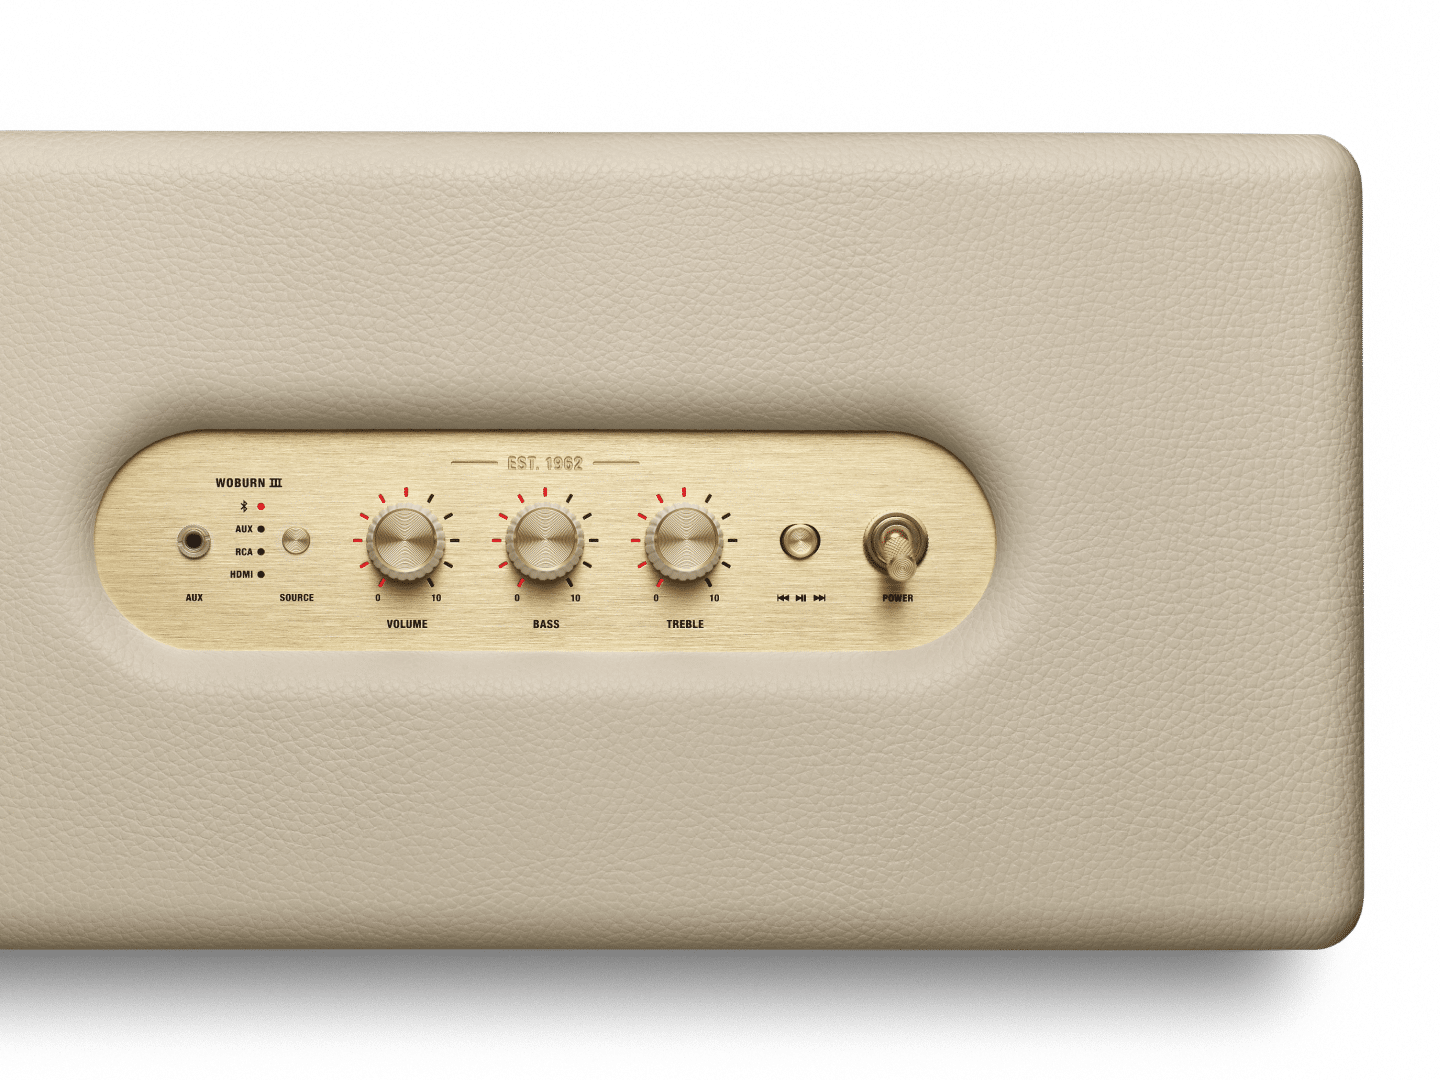 The front of a beige Marshall WOBURN III amplifier with buttons on it.